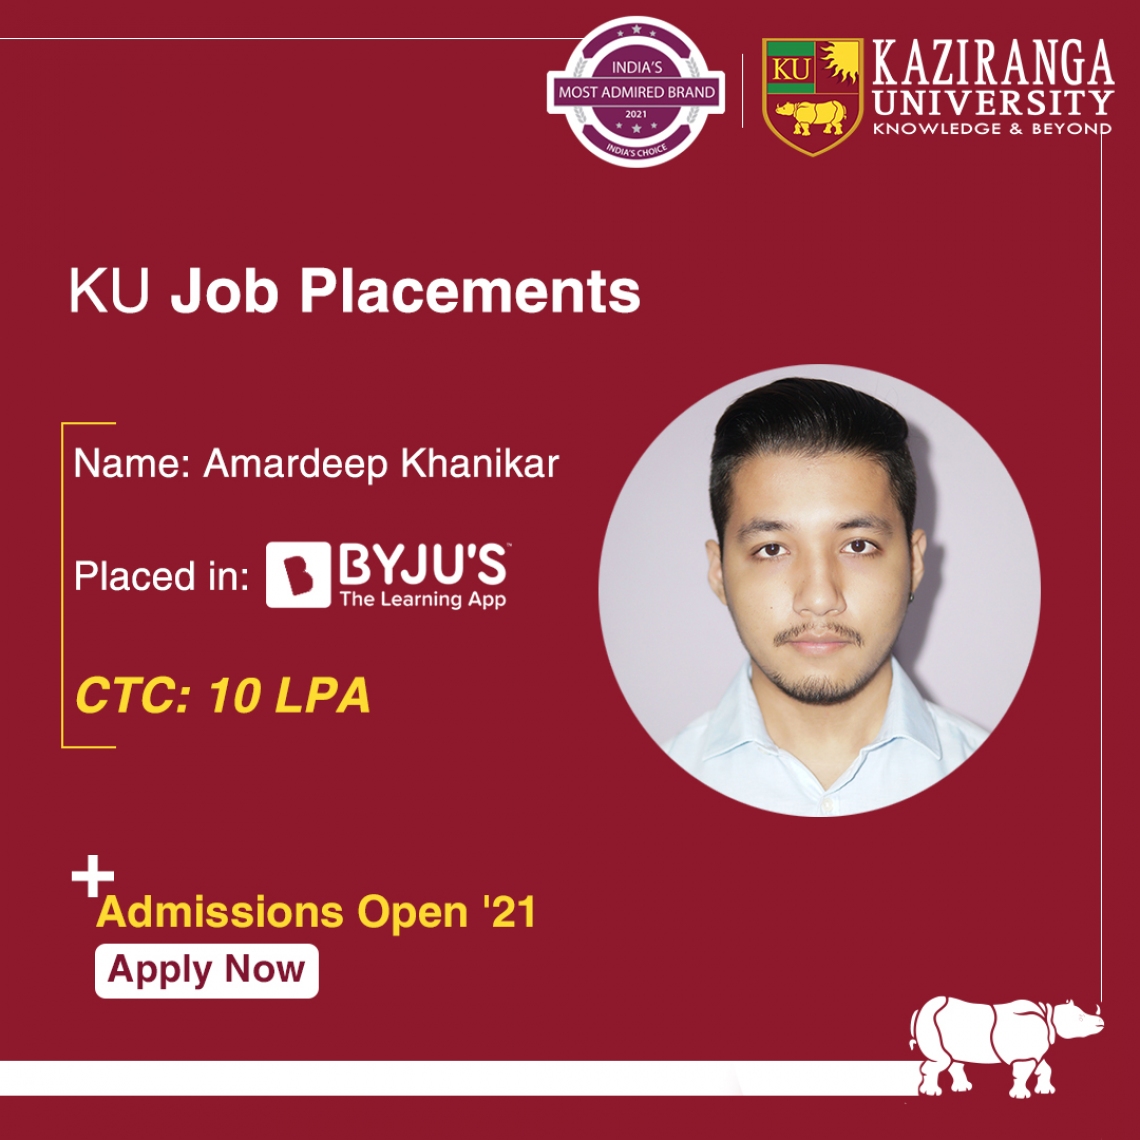 KU student placed with 10 lac per annum CTC